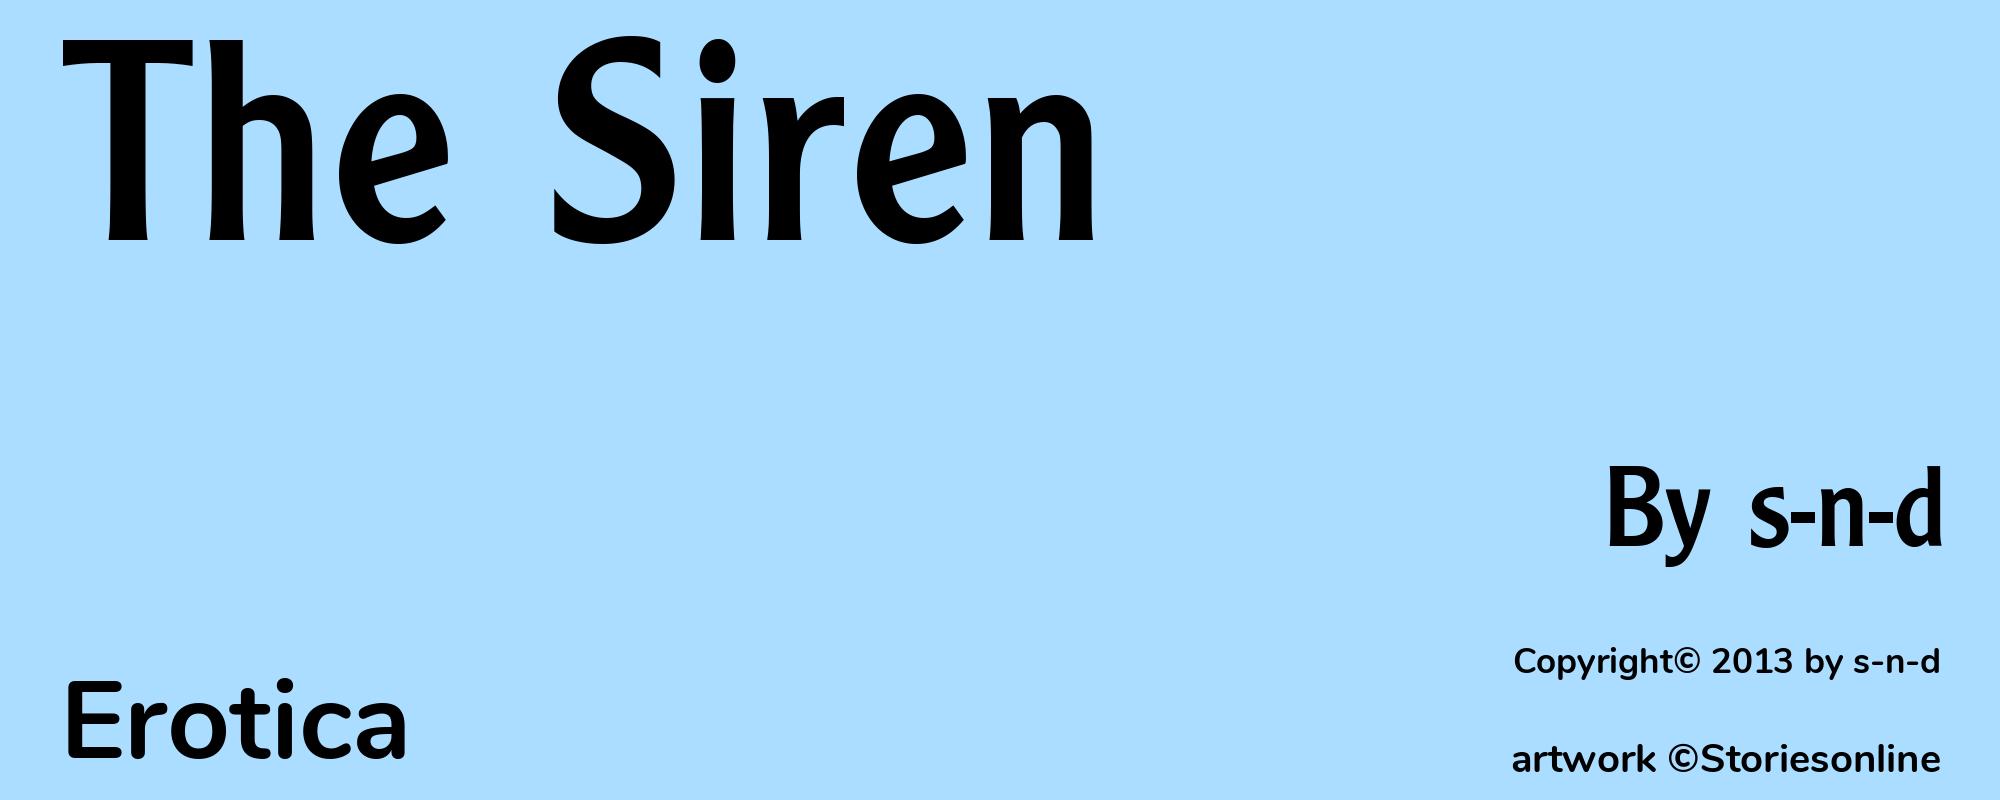 The Siren - Cover